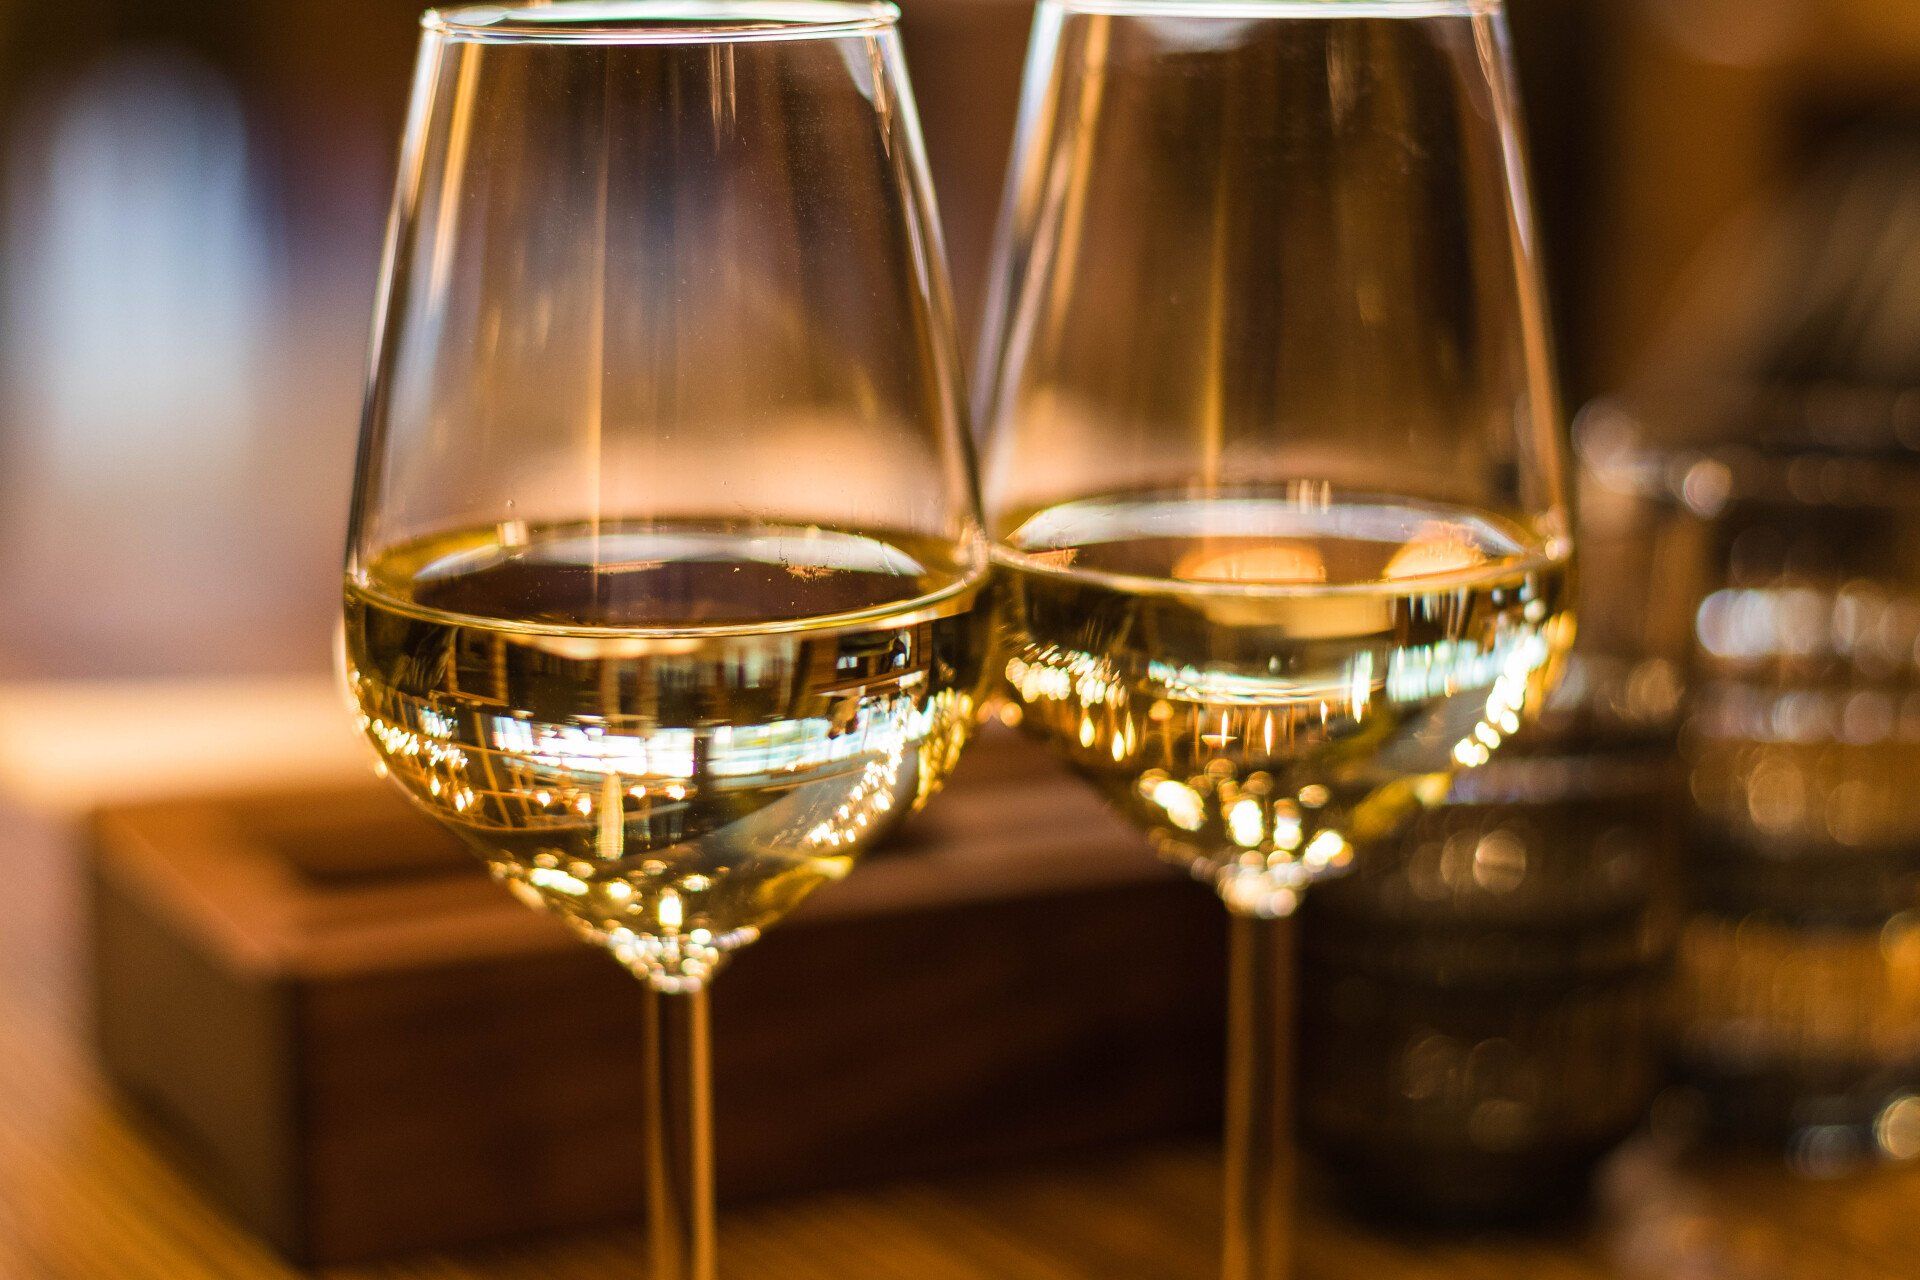 two glasses of white wine are sitting on a wooden table .